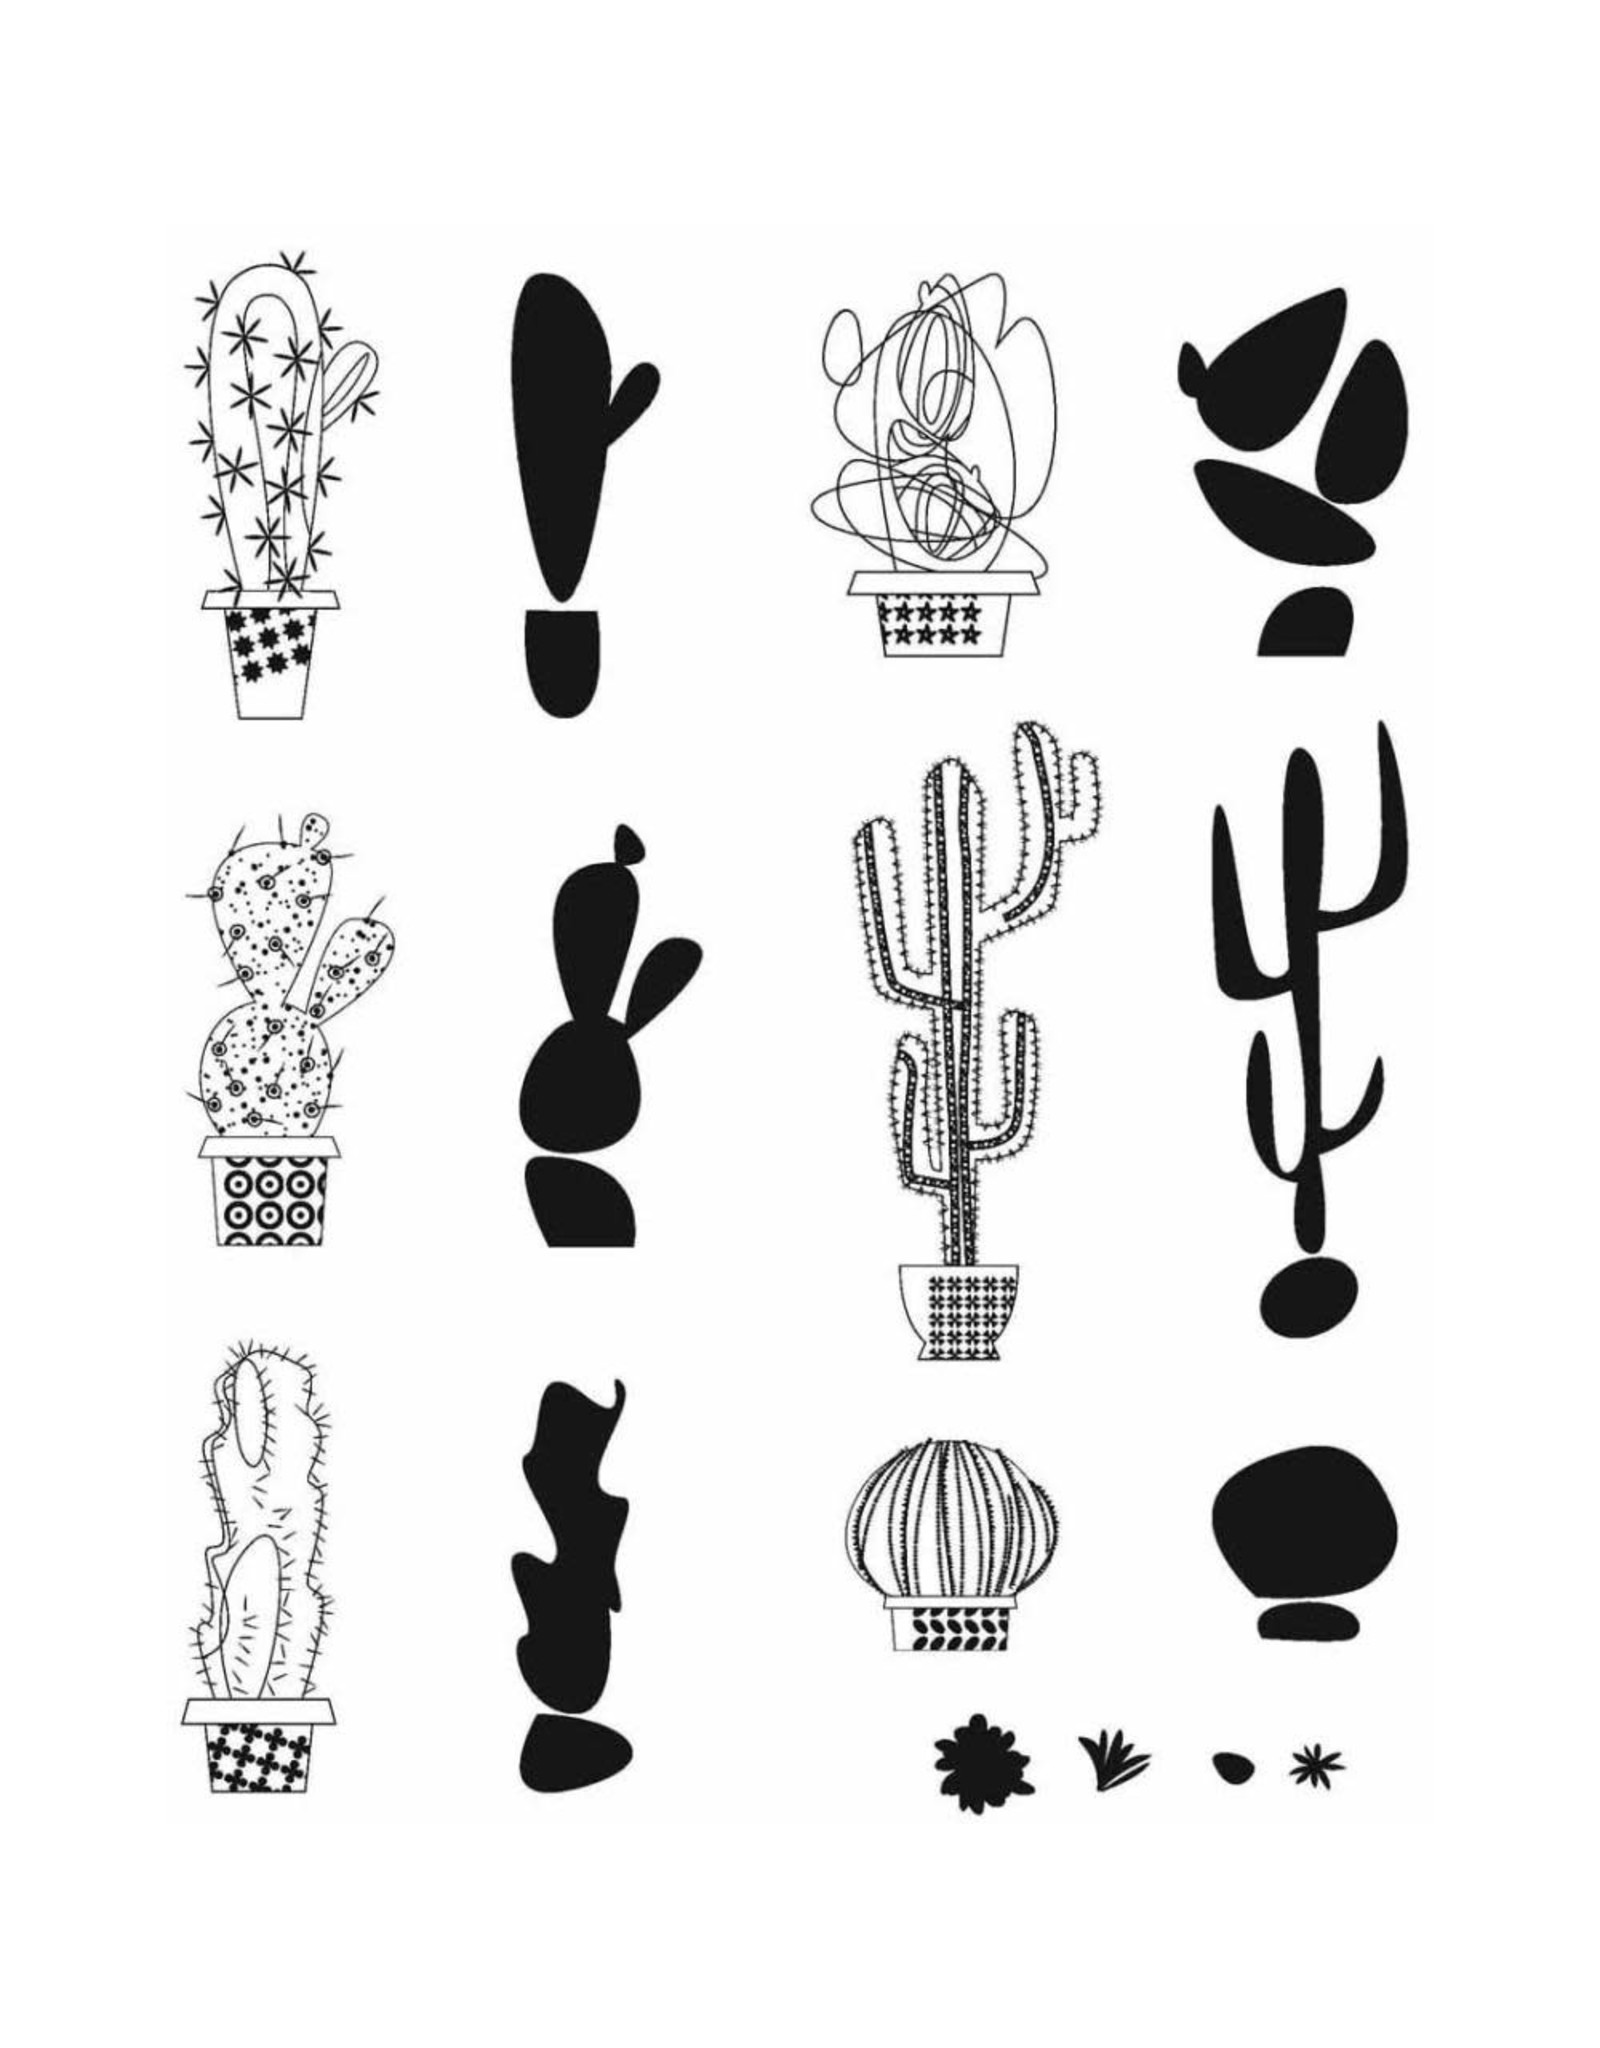 Tim Holtz - Stampers Anonymous MOD CACTUS-CLING RUBBER STAMP SET